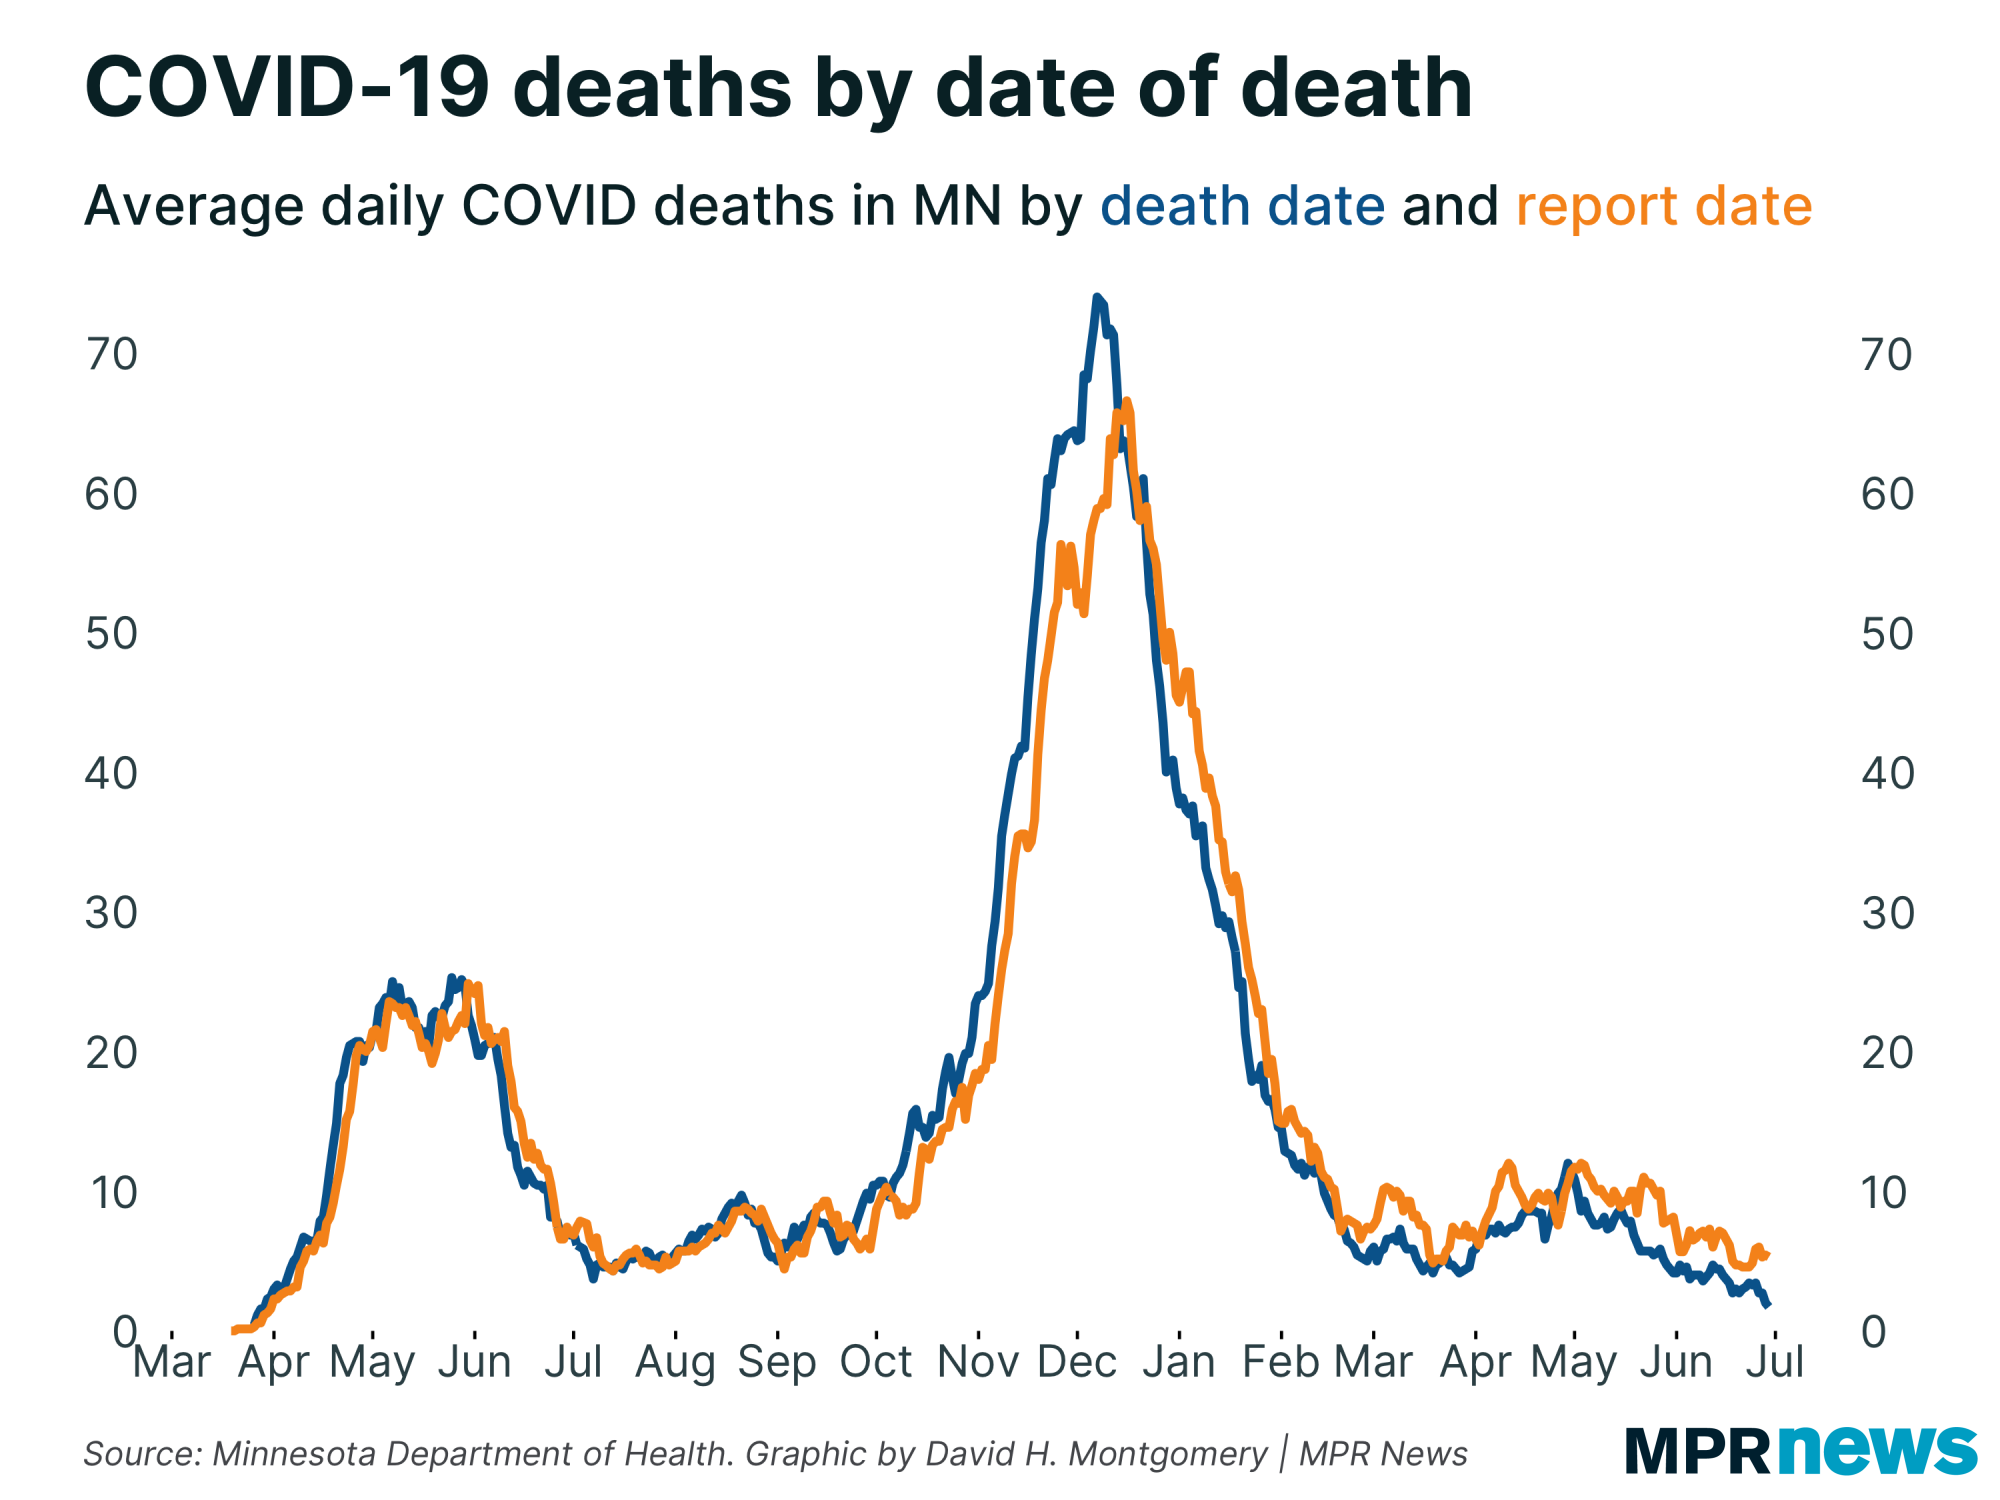 Graph of Minnesota COVID-19 death rates by death date and date reported